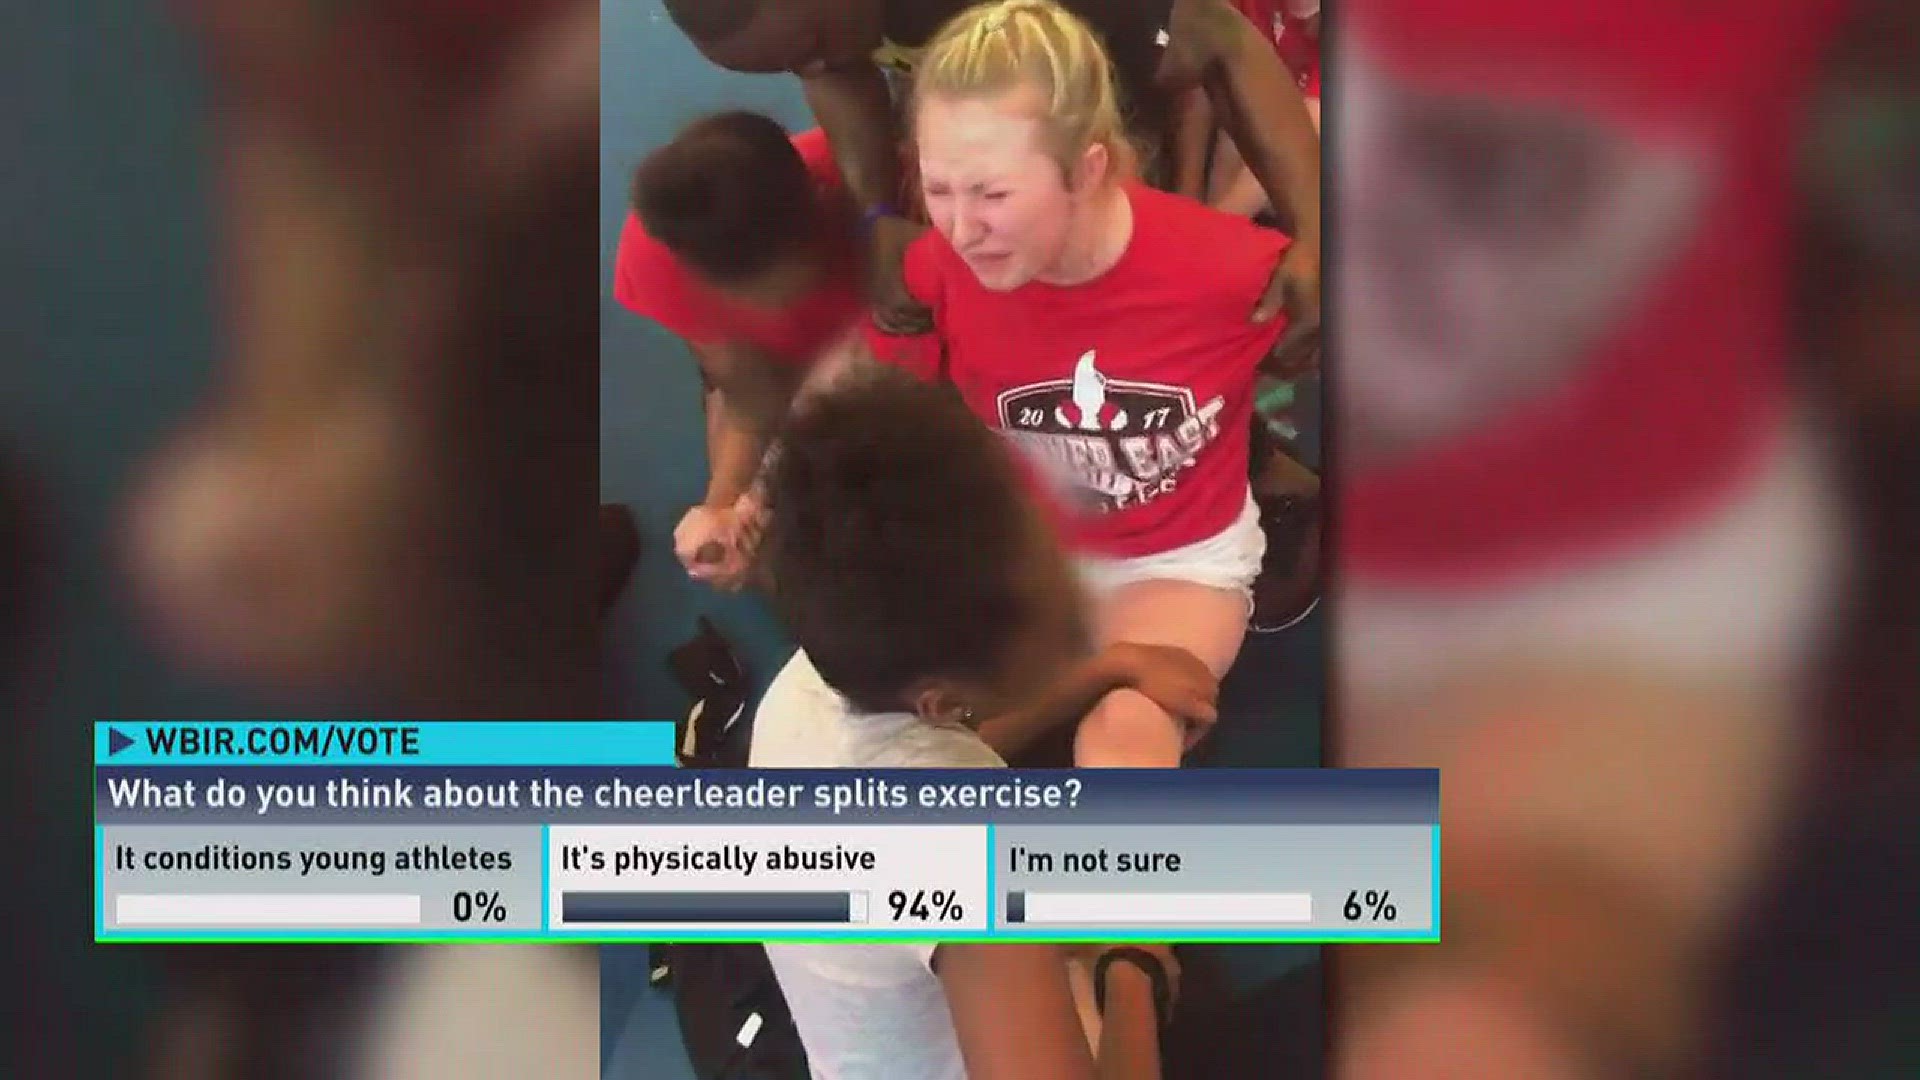 Local Cheerleaders React To Video Of Girls Forced Into Splits Wbir Com